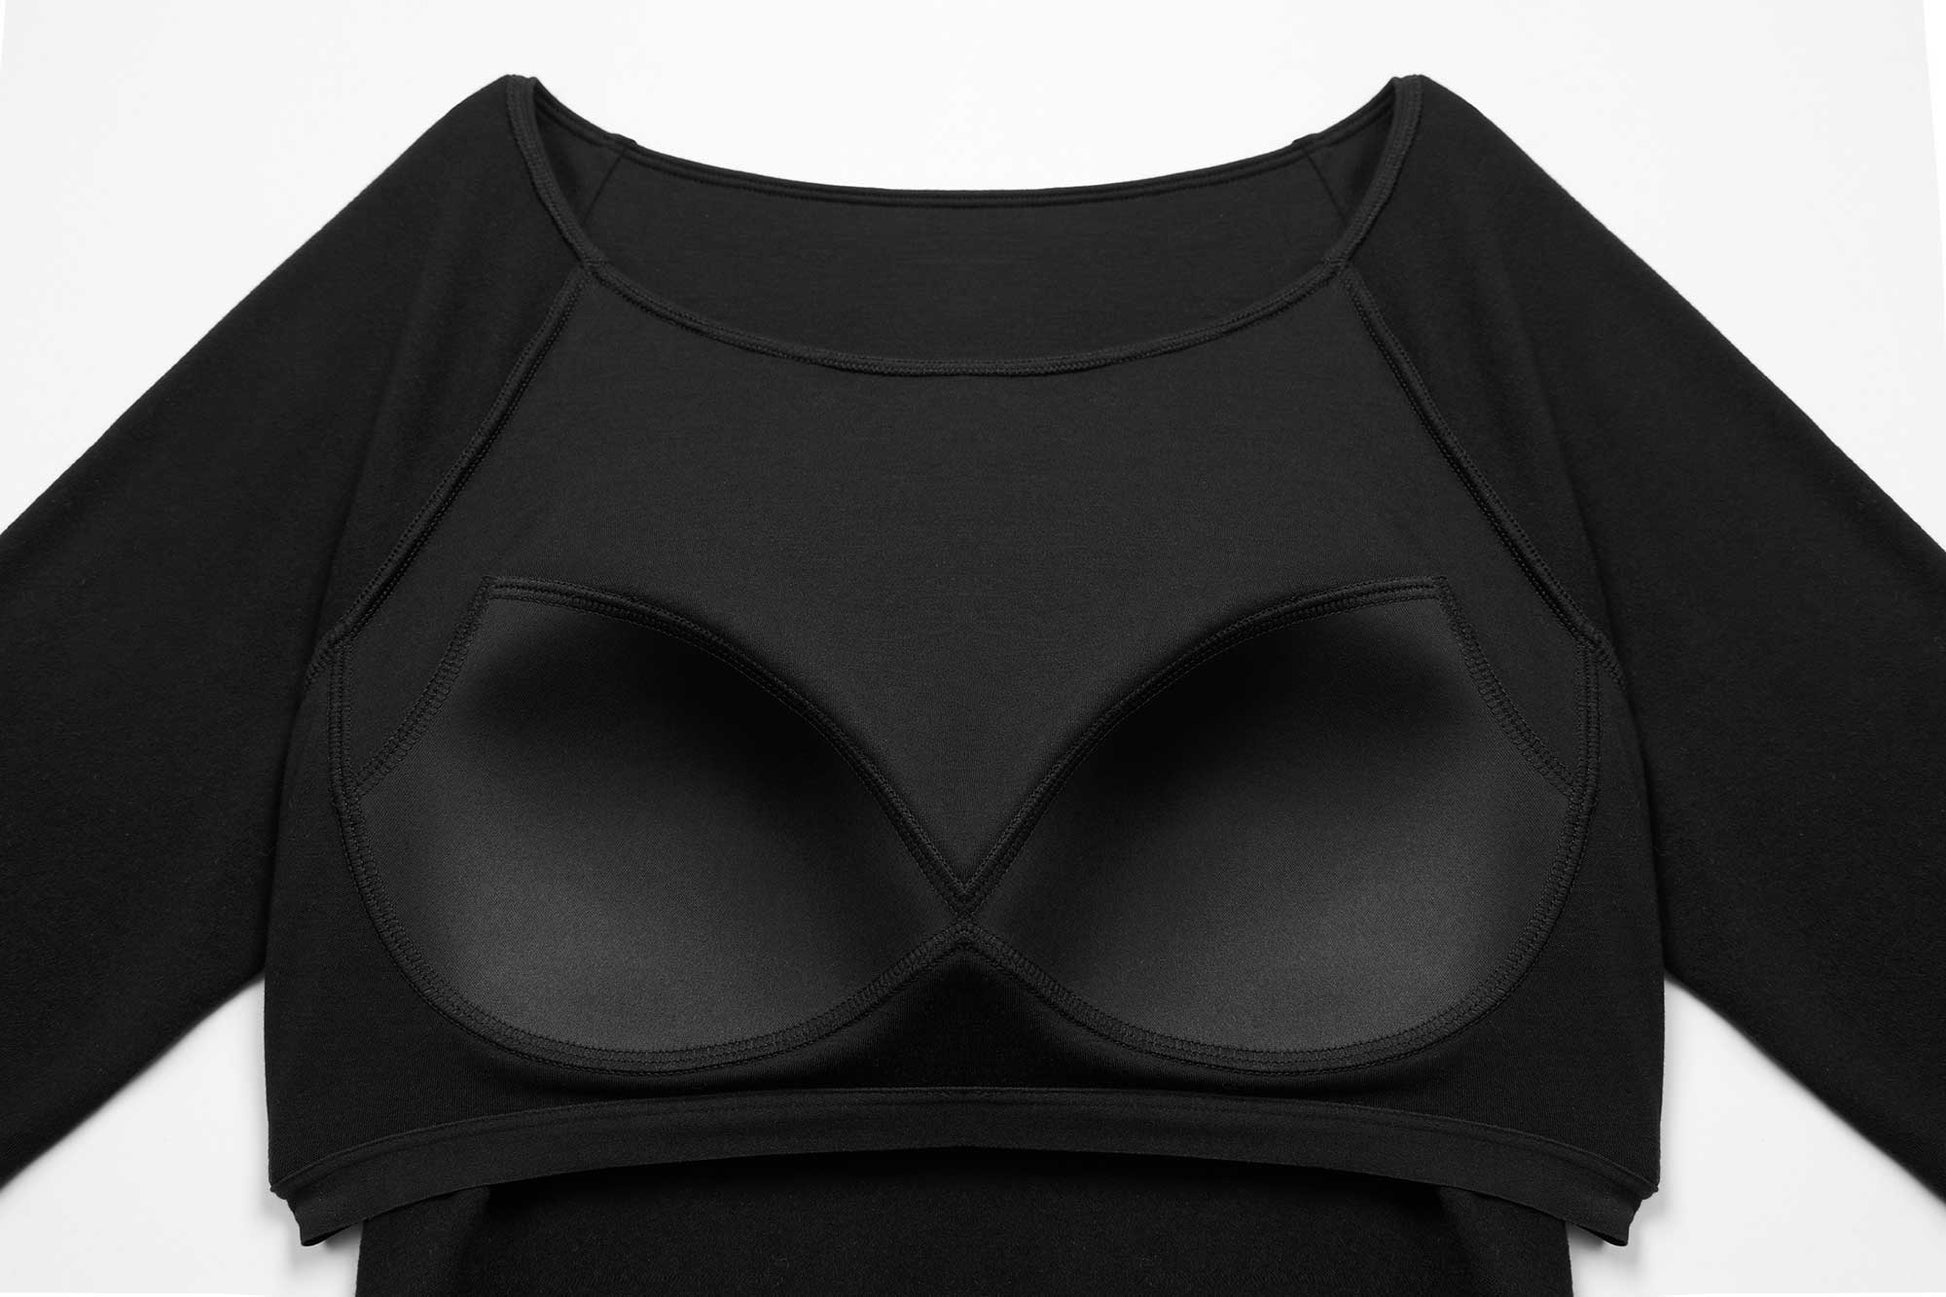 inside of the thermal top with built in bra pads